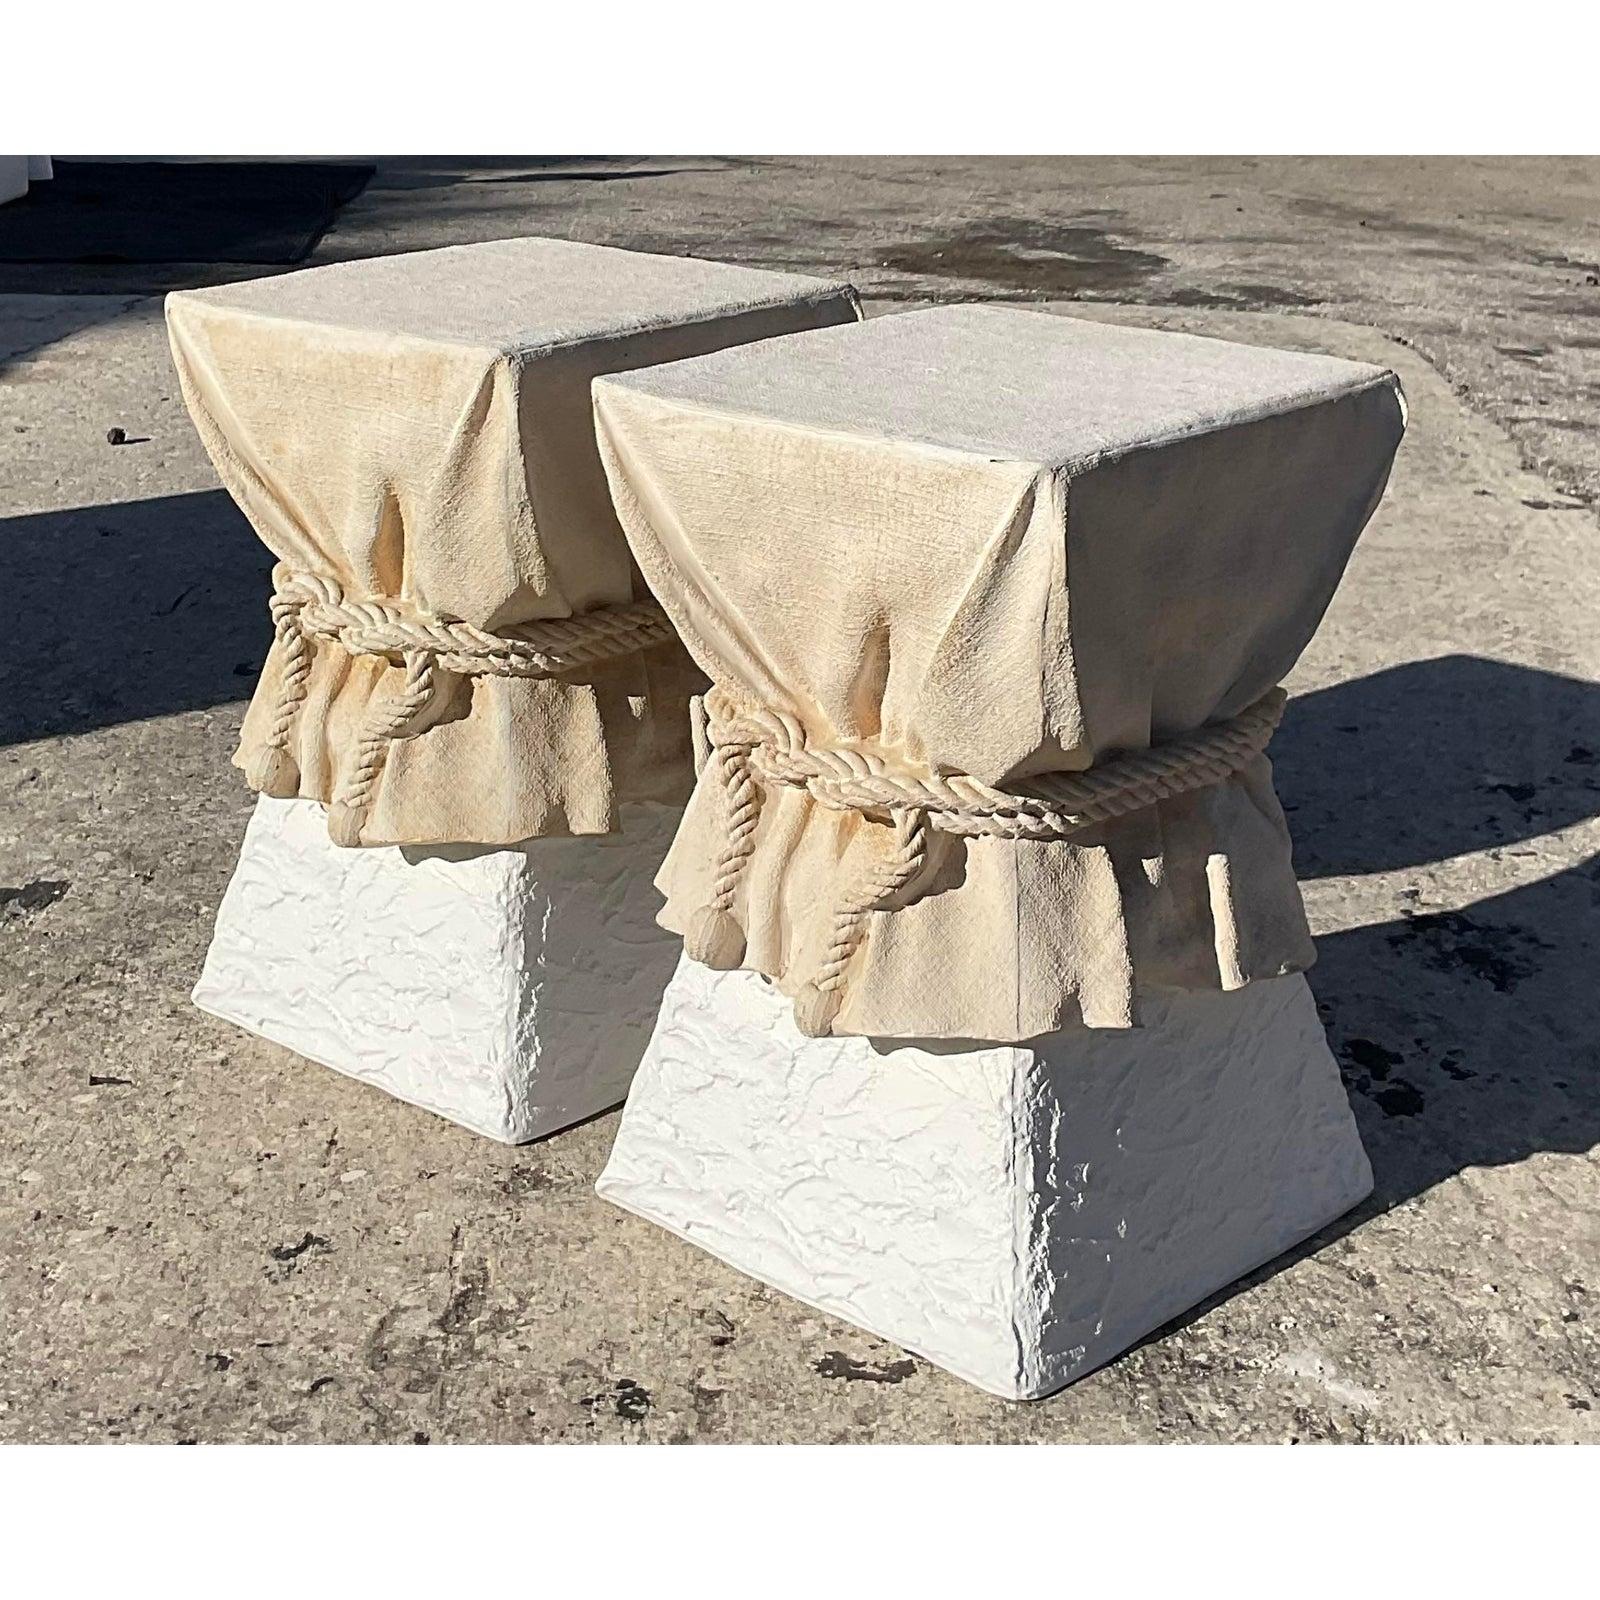 Fantastic pair of vintage John Dickinson side tables. Iconic draped plaster design with a rope tie. Two tone finish to feature the drape look. Acquired from a Palm Beach estate.